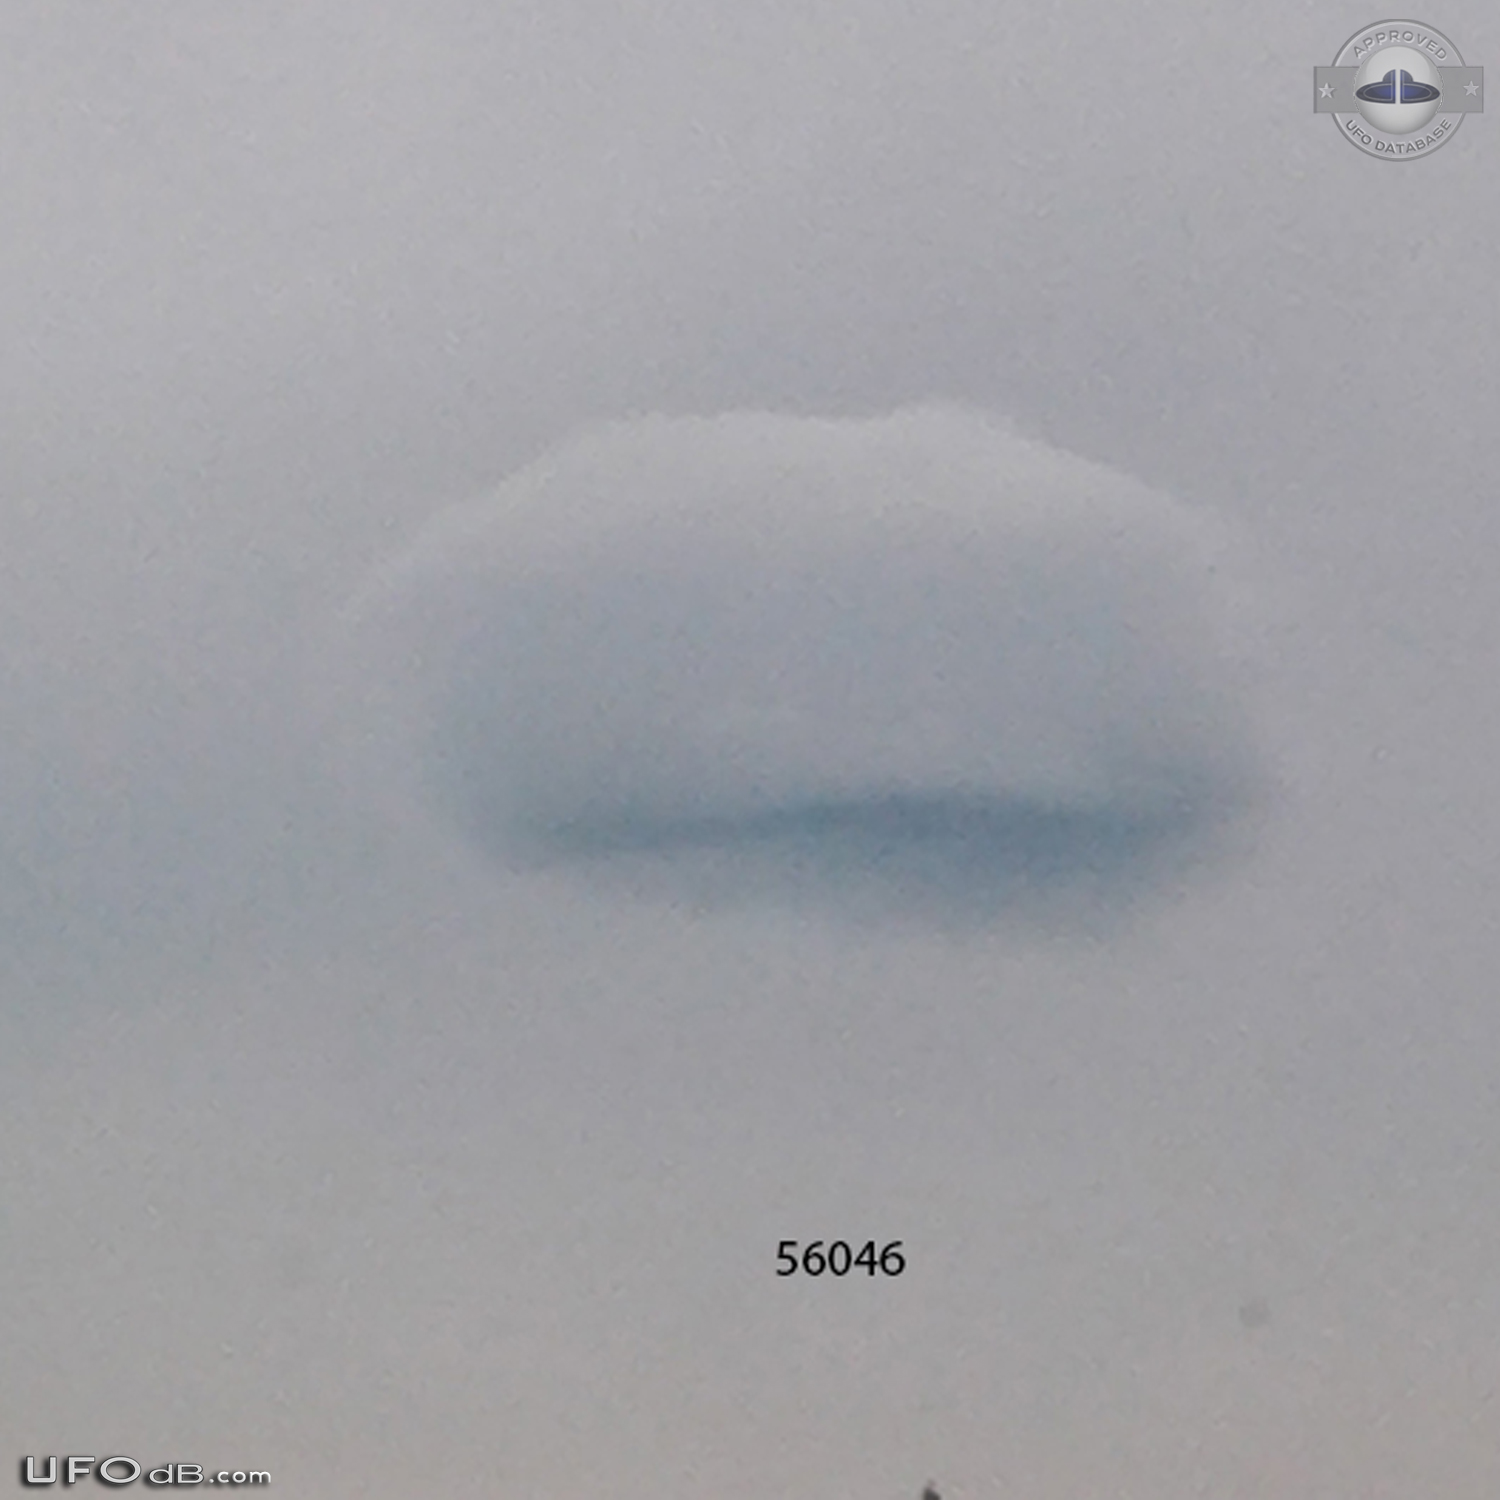 Cloud UFO over Atlanta reported to MUFON by 3 different witnesses 2014 UFO Picture #571-6